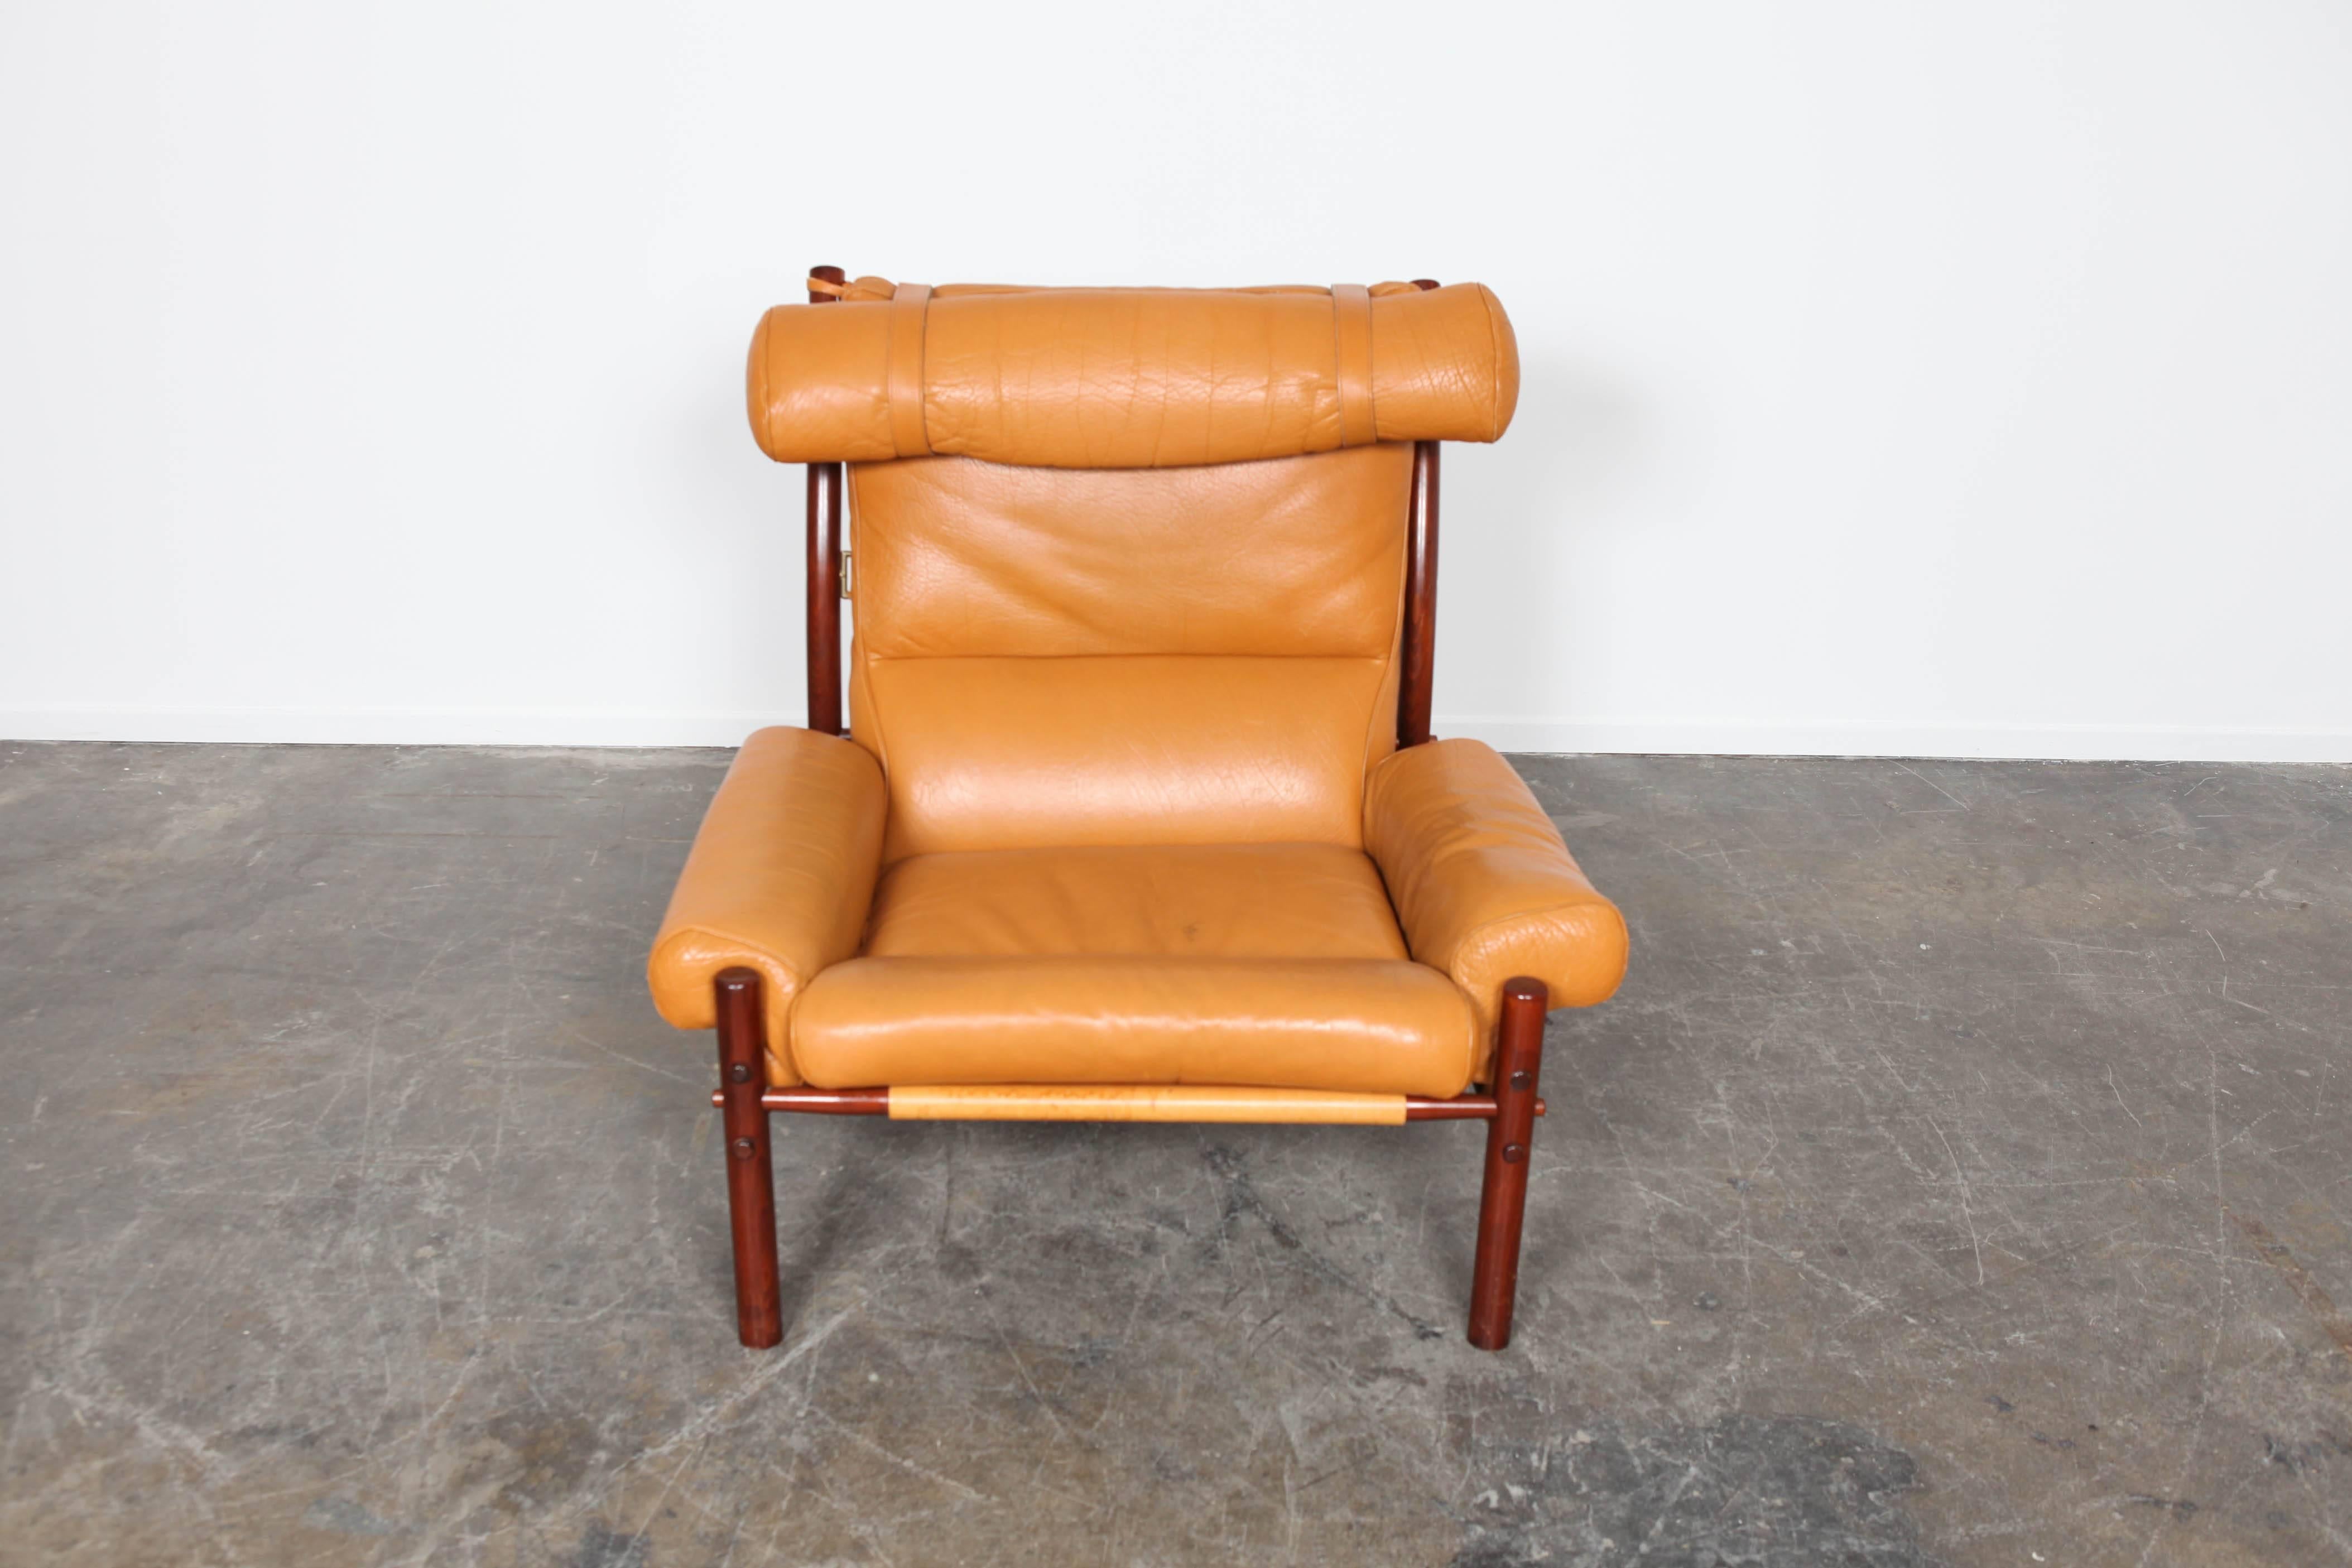 "Inca" leather lounge chair by Arne Norell, Sweden. Original leather.